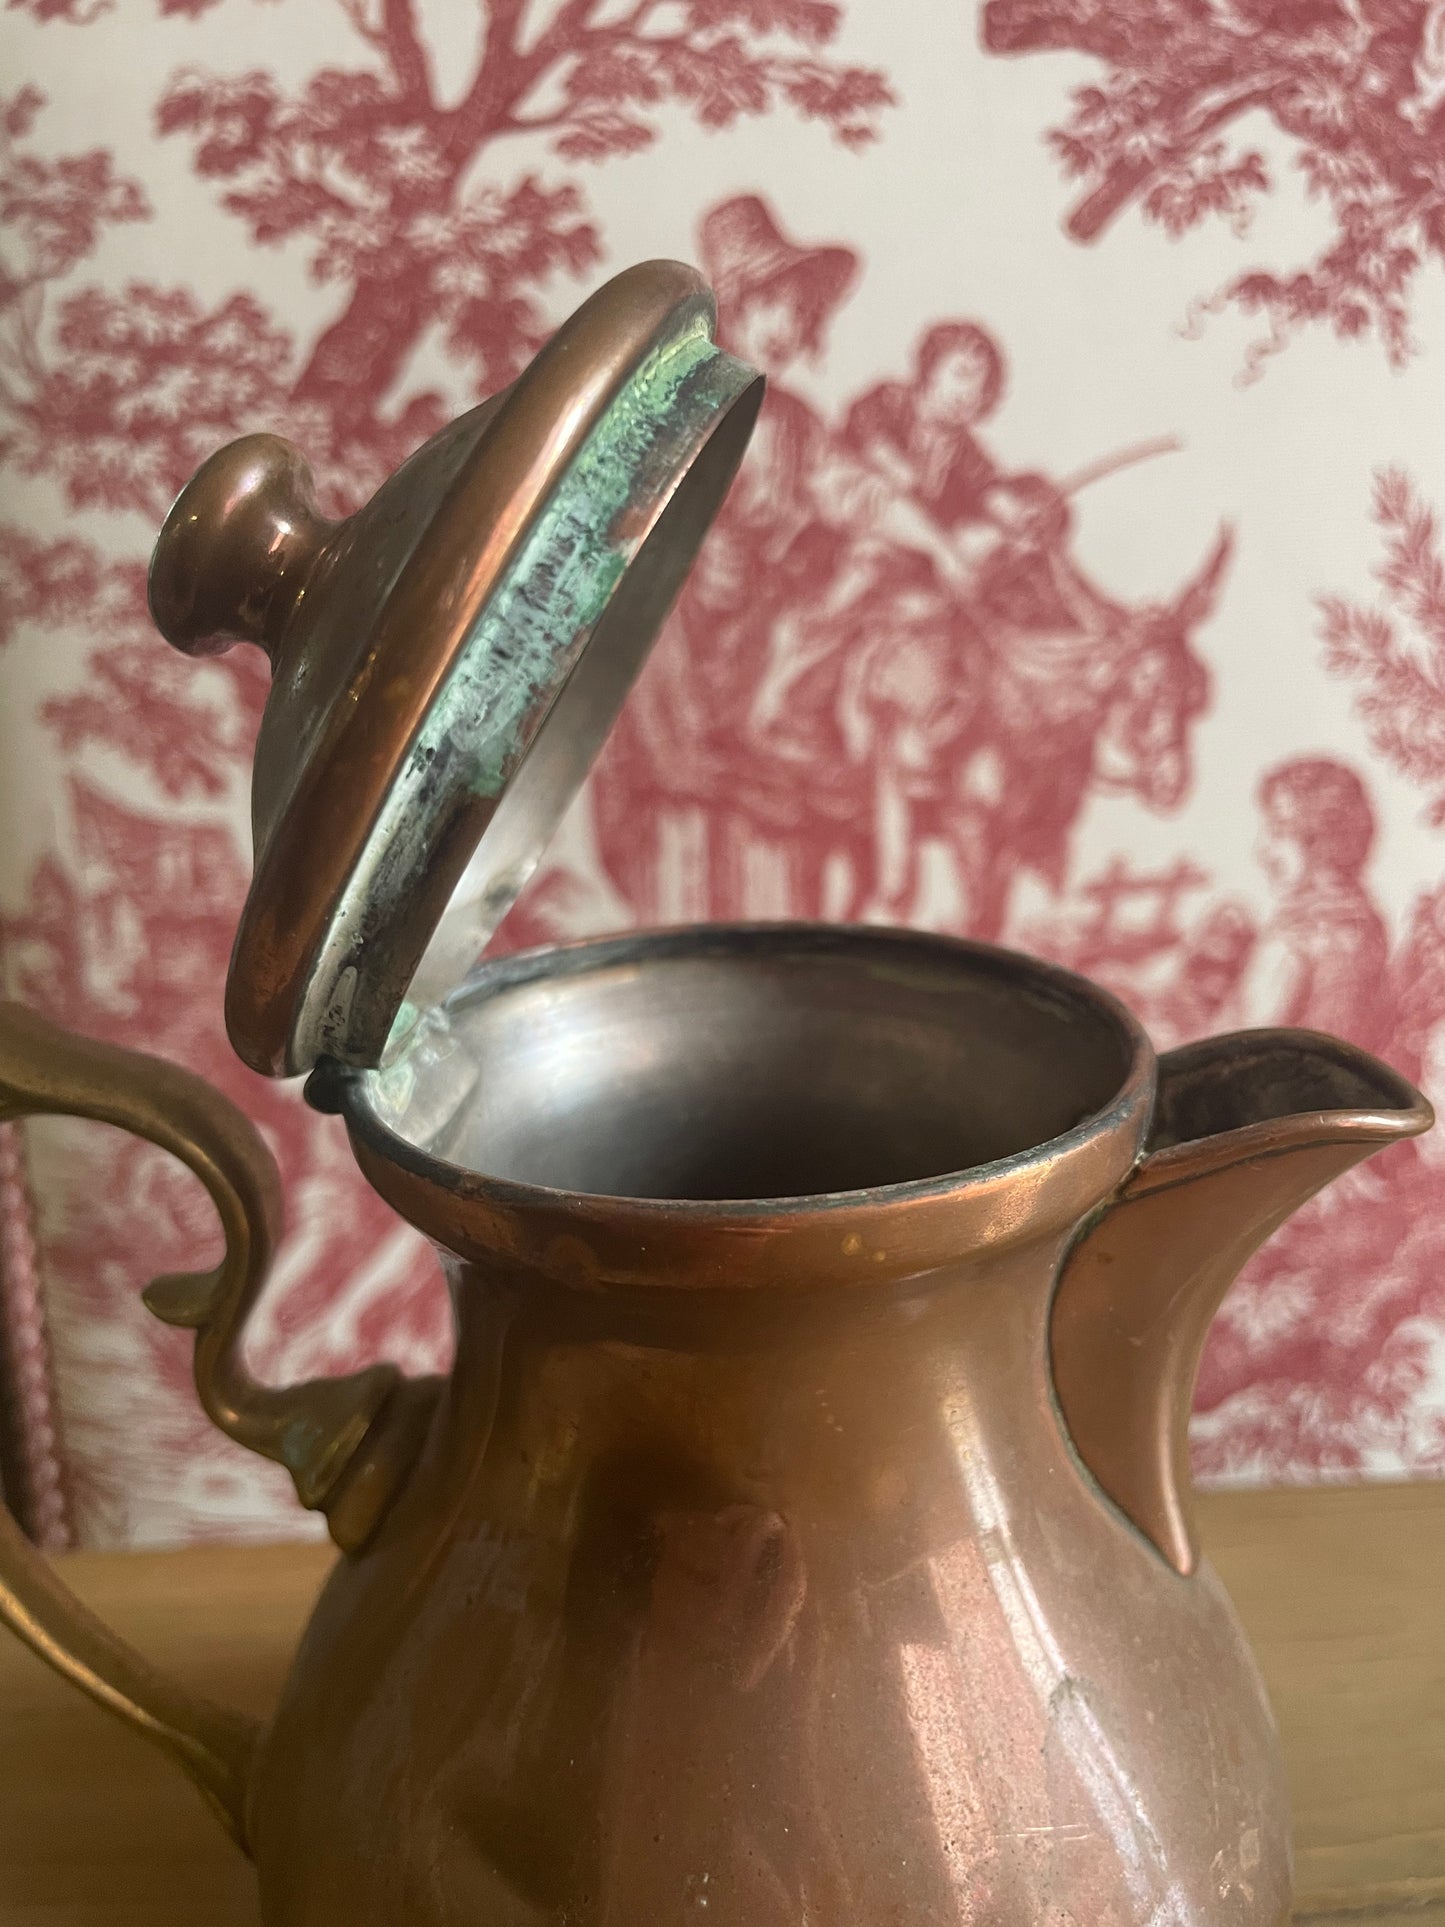 Antique Copper Pitcher with Brass Handle from France